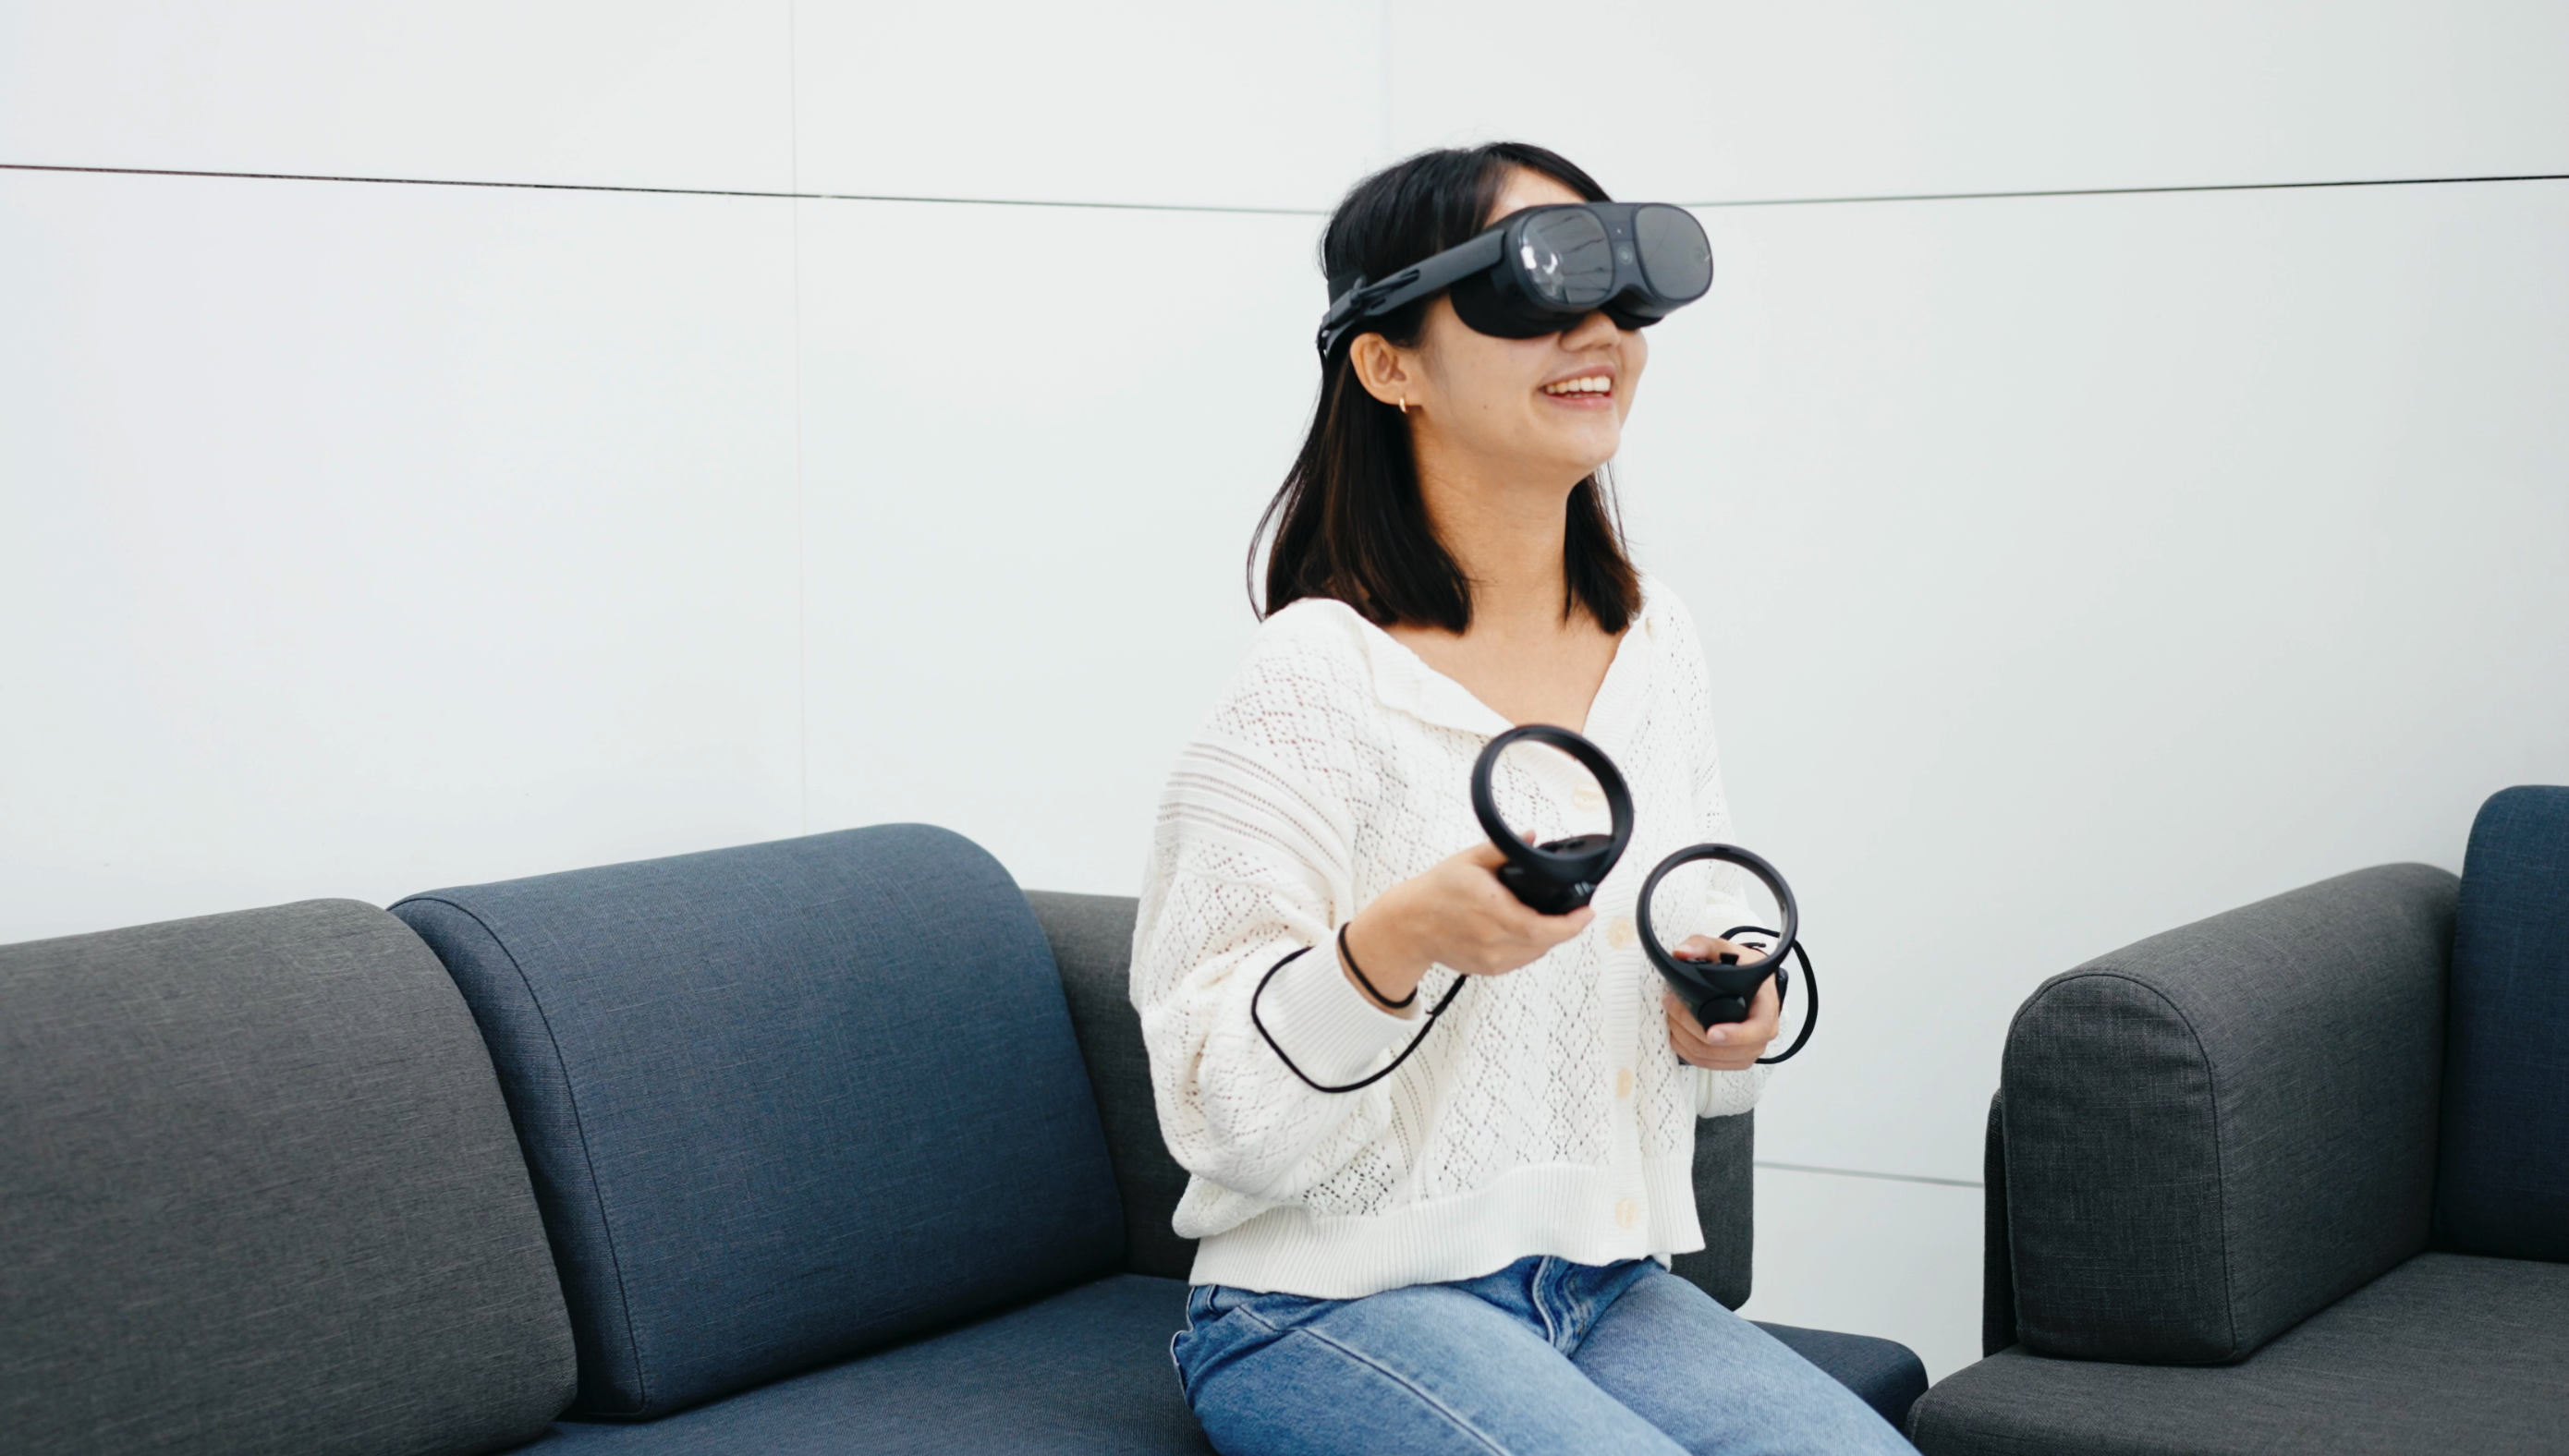 democratizing access to high-quality virtual experiences